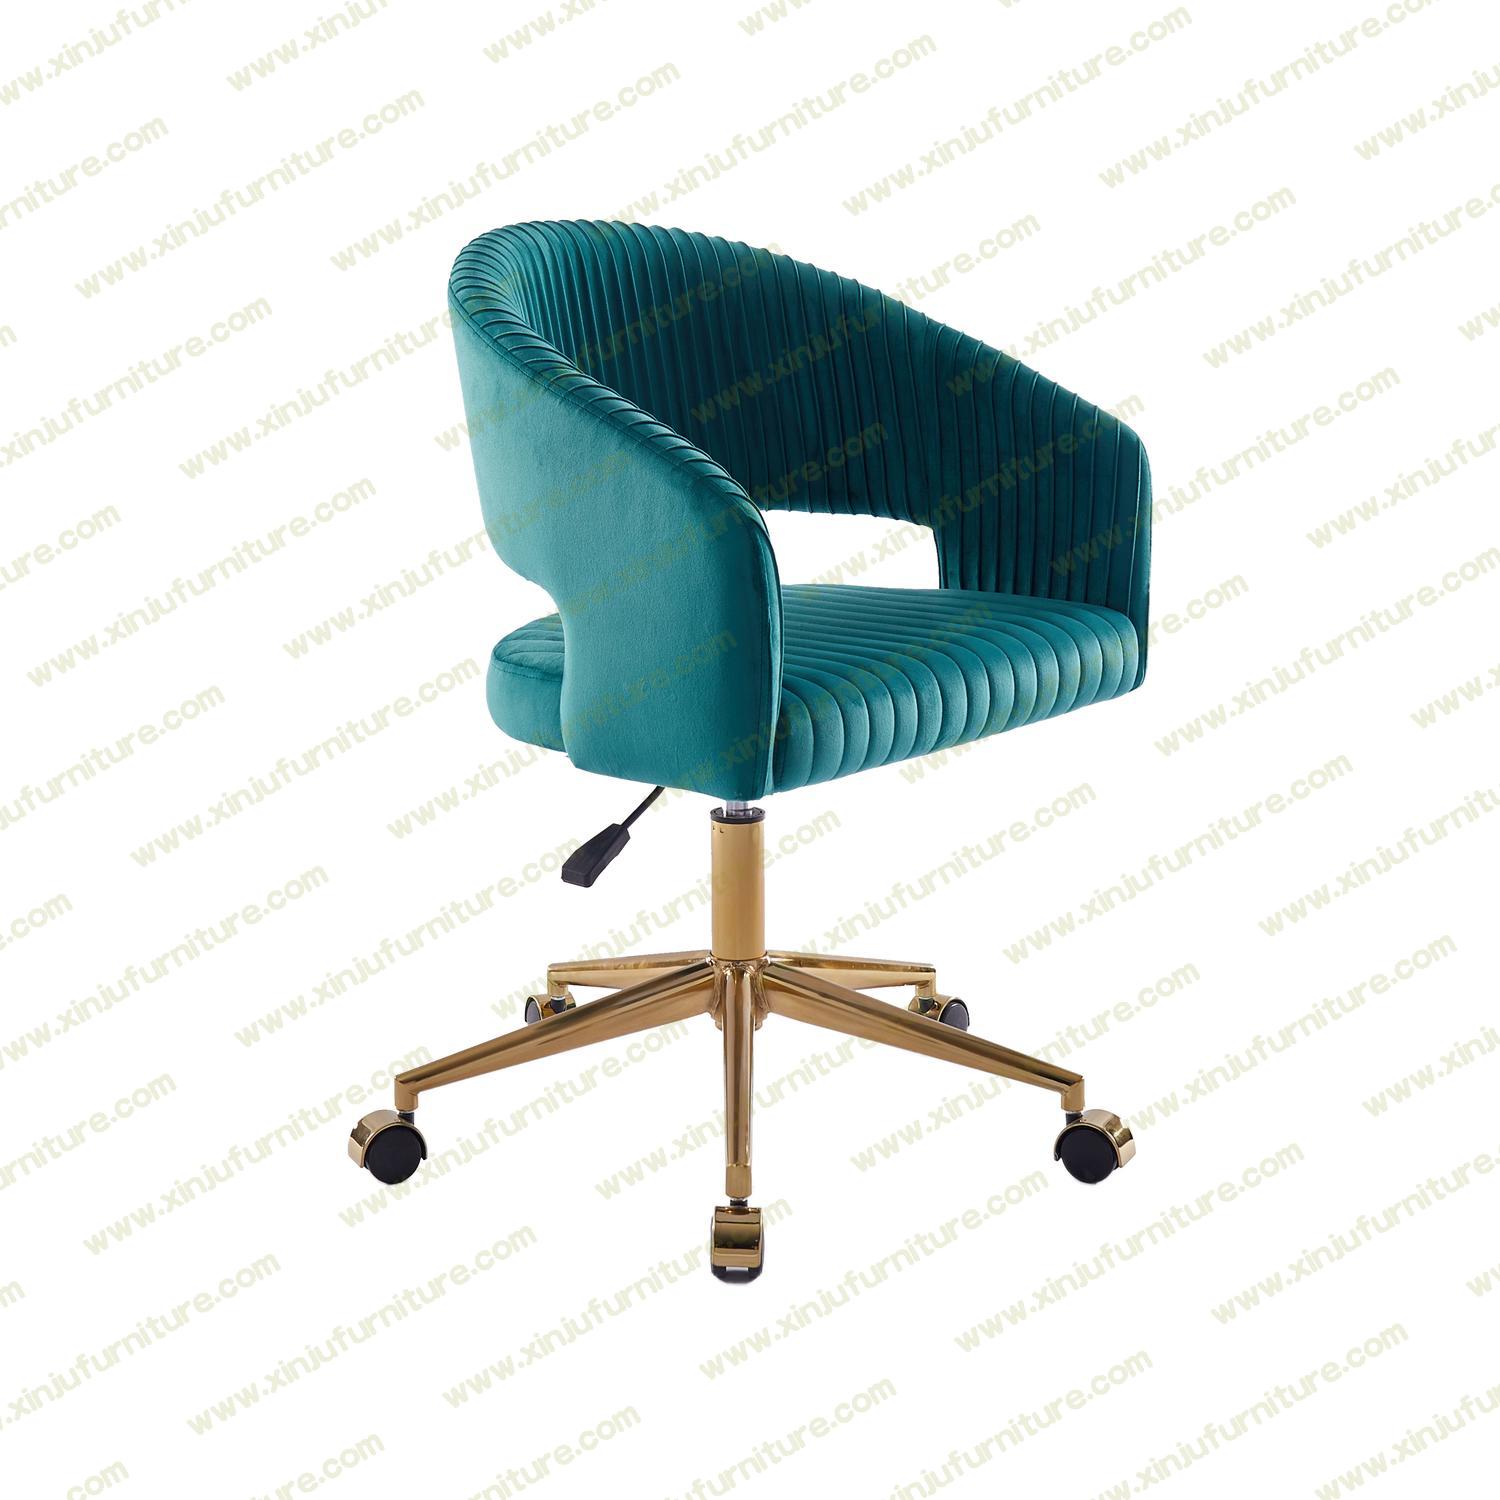 Simple removable tufted office chair stripe